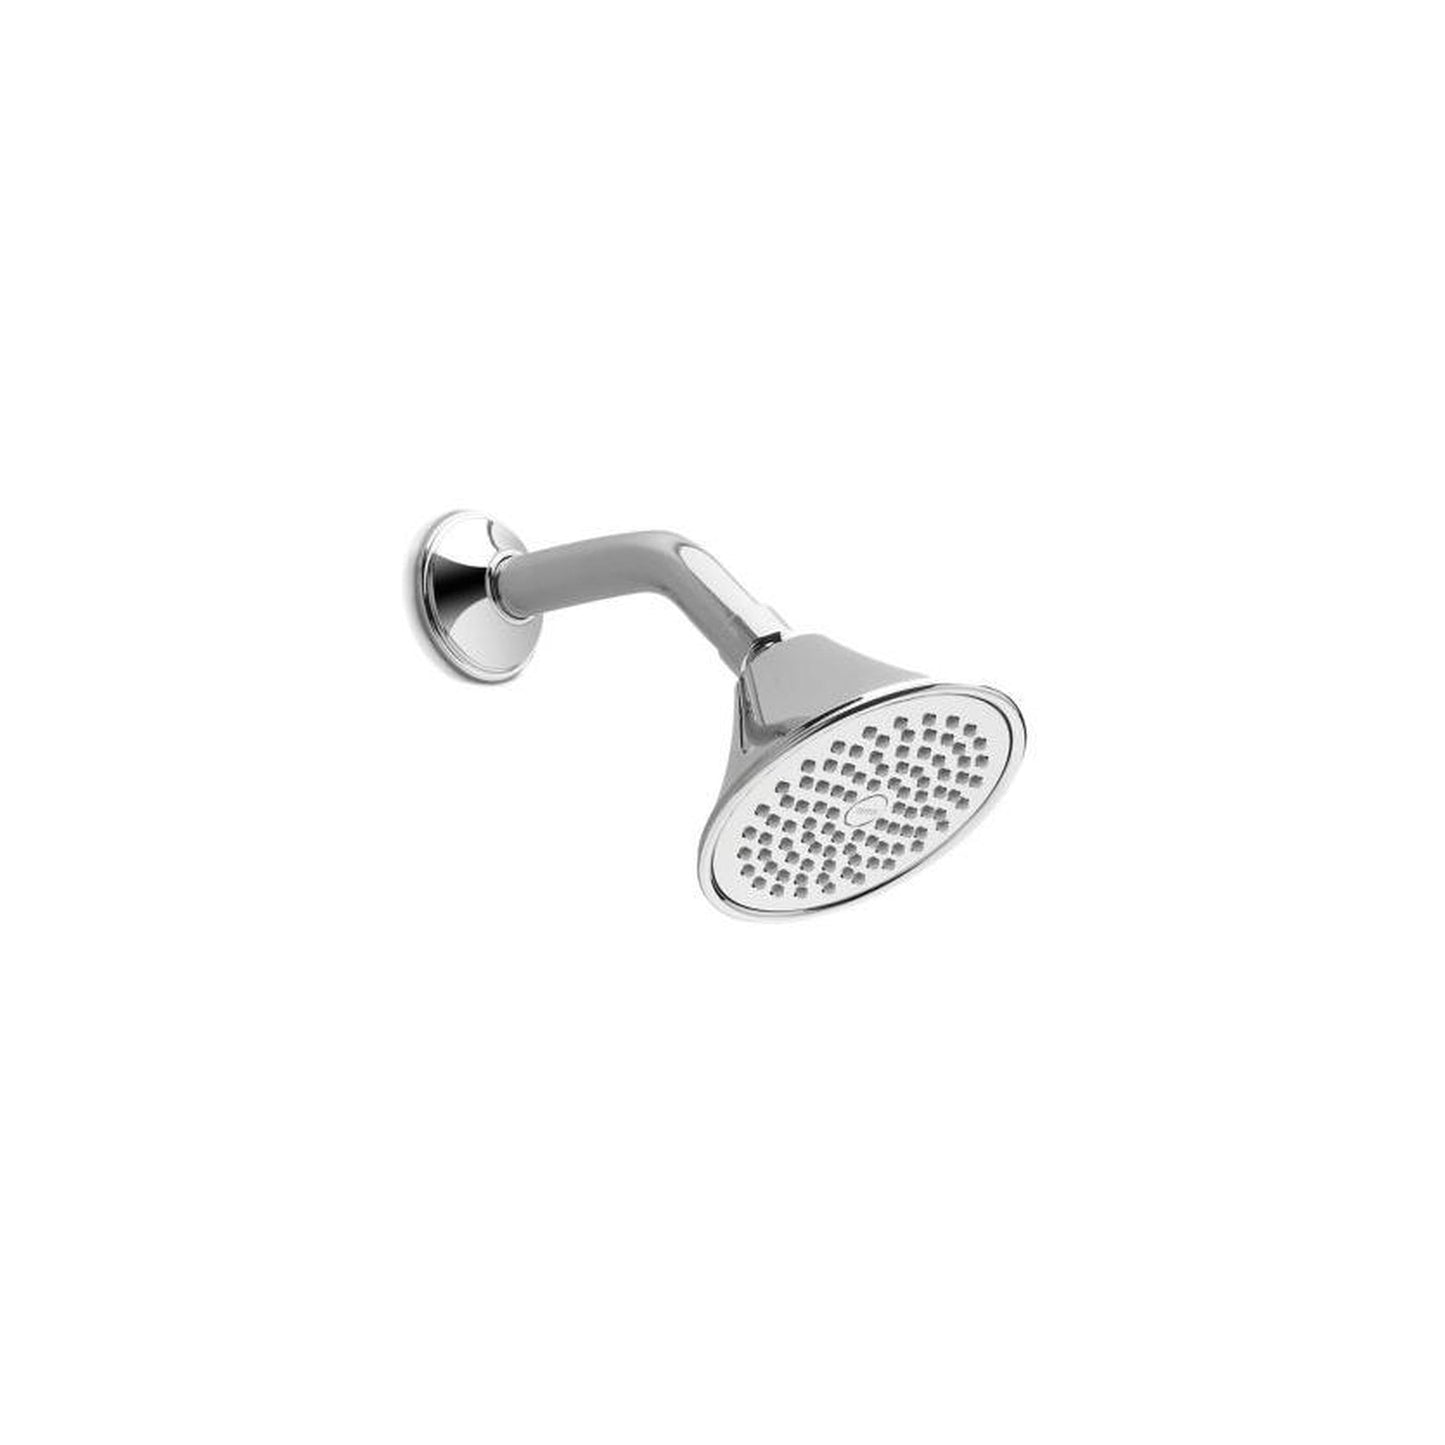 Toto Showerhead 4.5” 5 Mode 2.5GPM Brushed Nickel